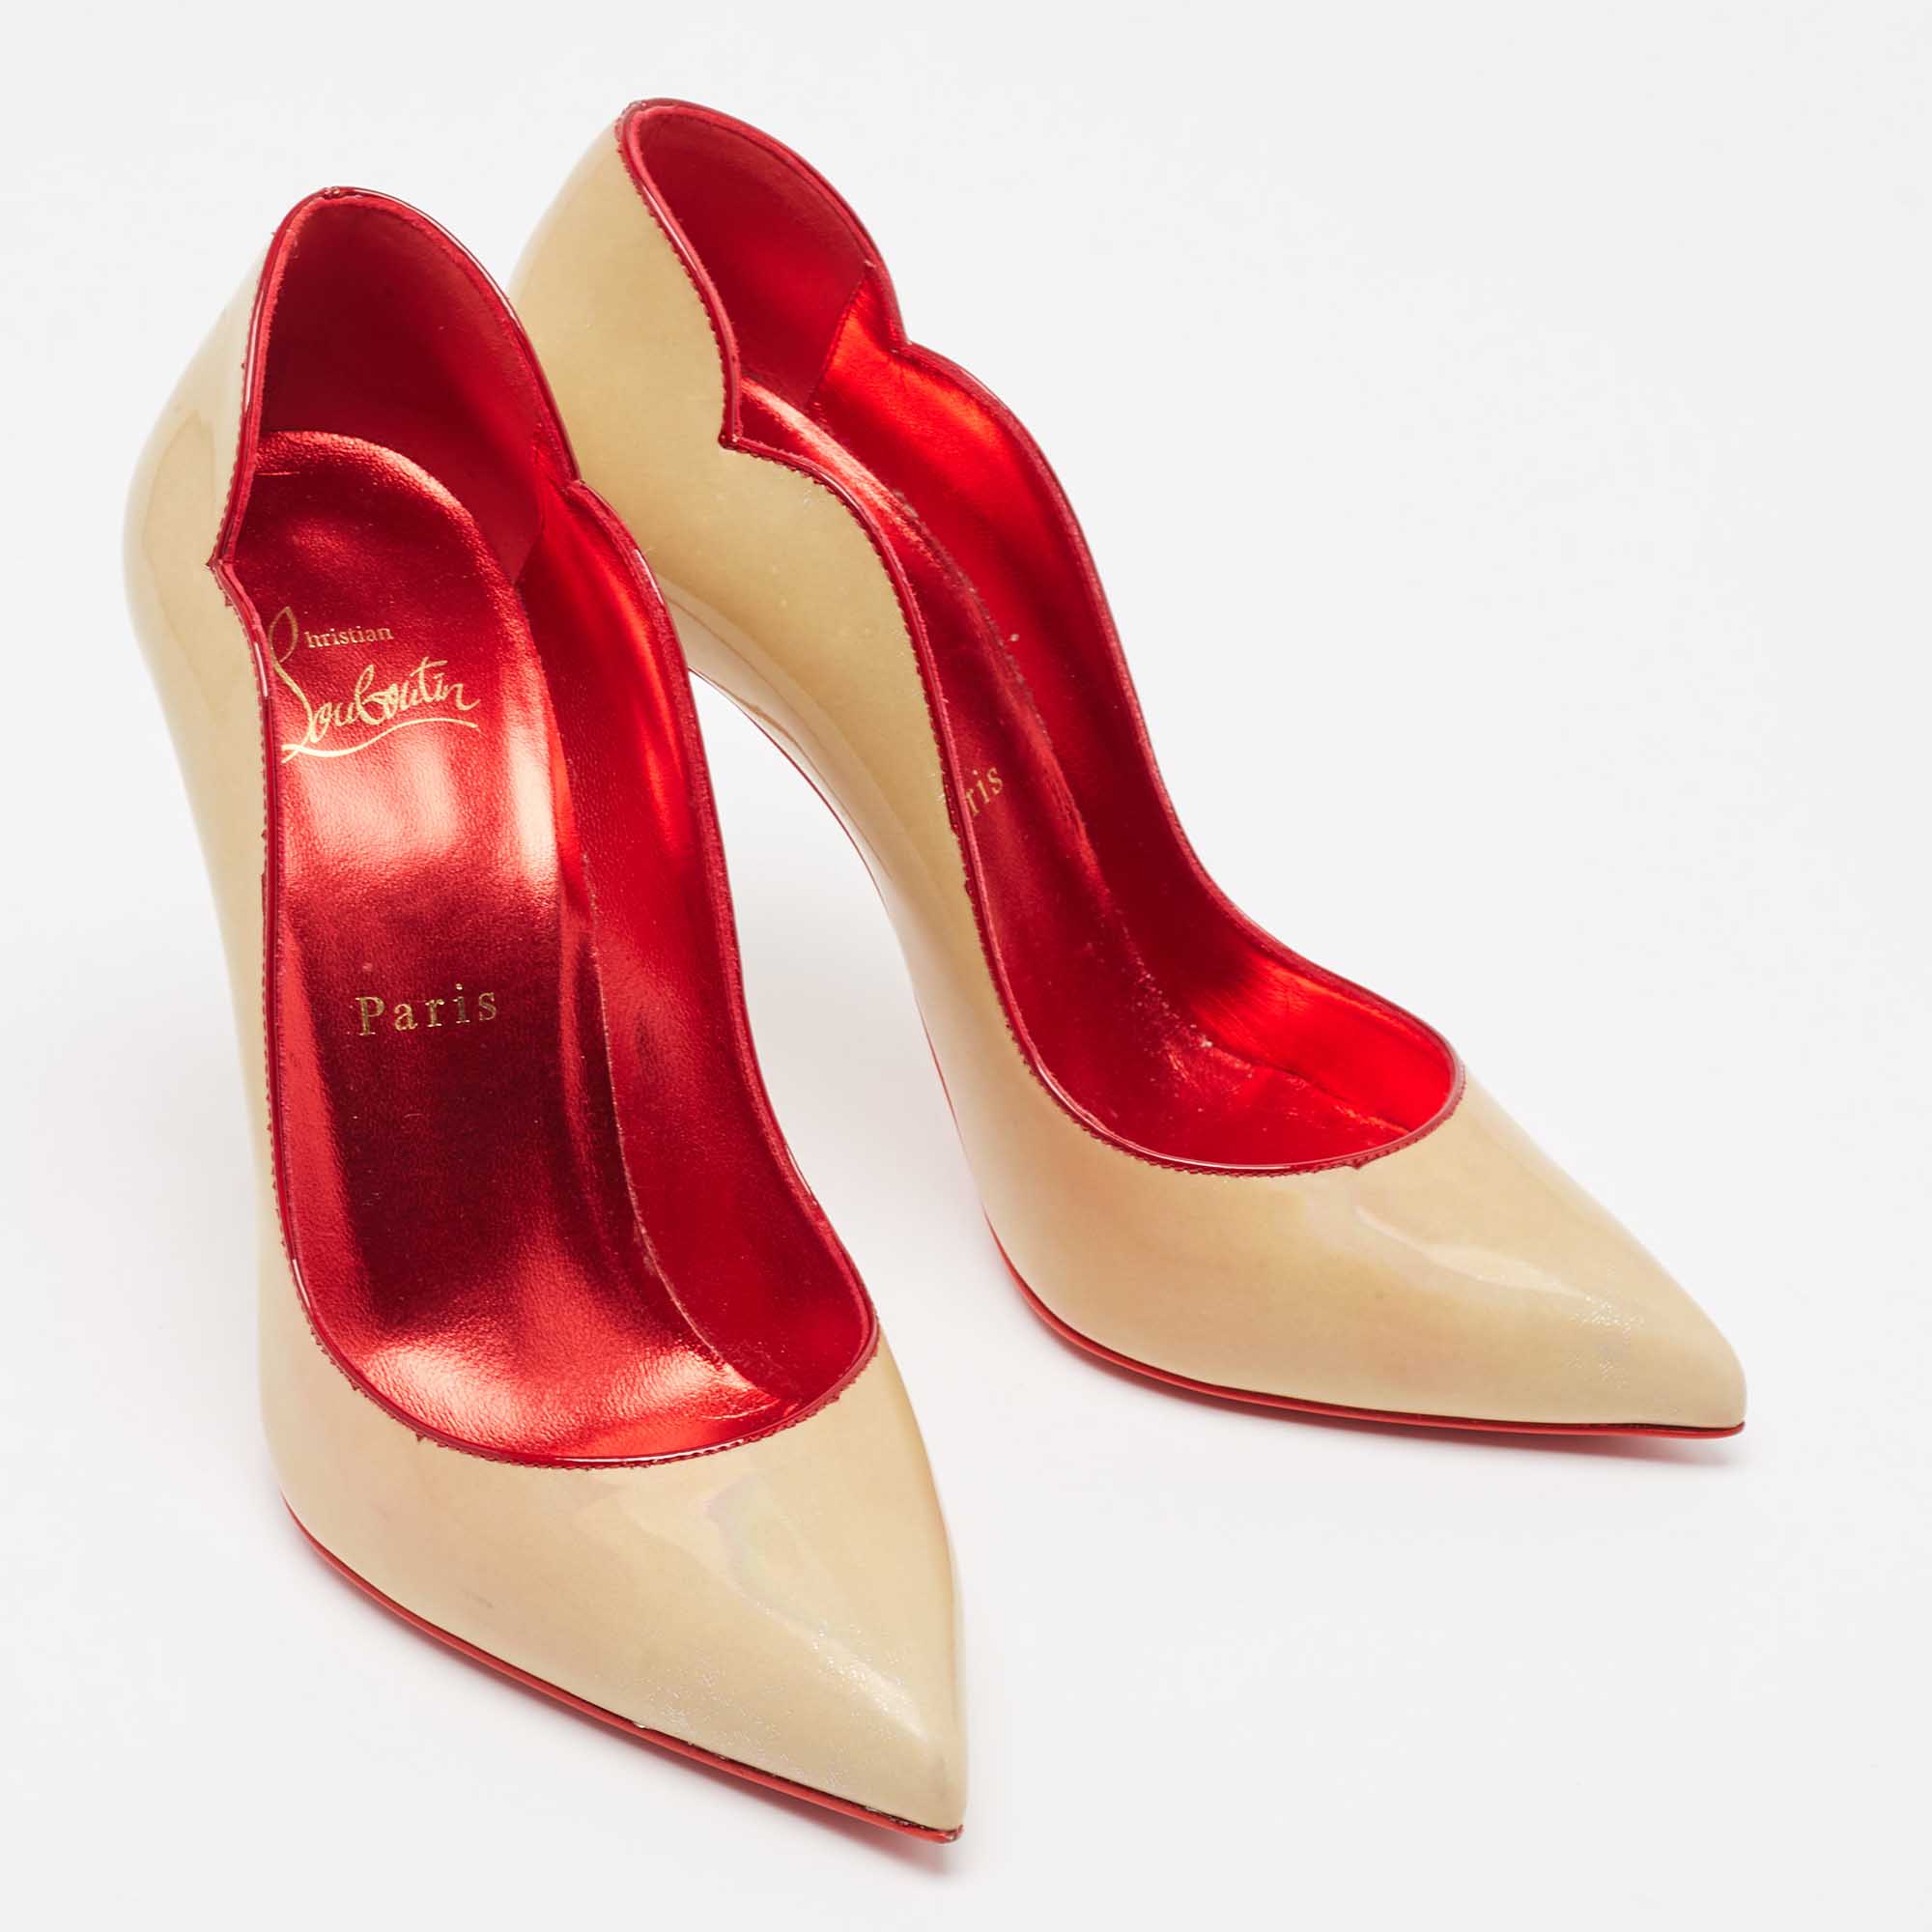 Christian Louboutin Beige Patent Leather Hot Chick Pumps Size 37.5